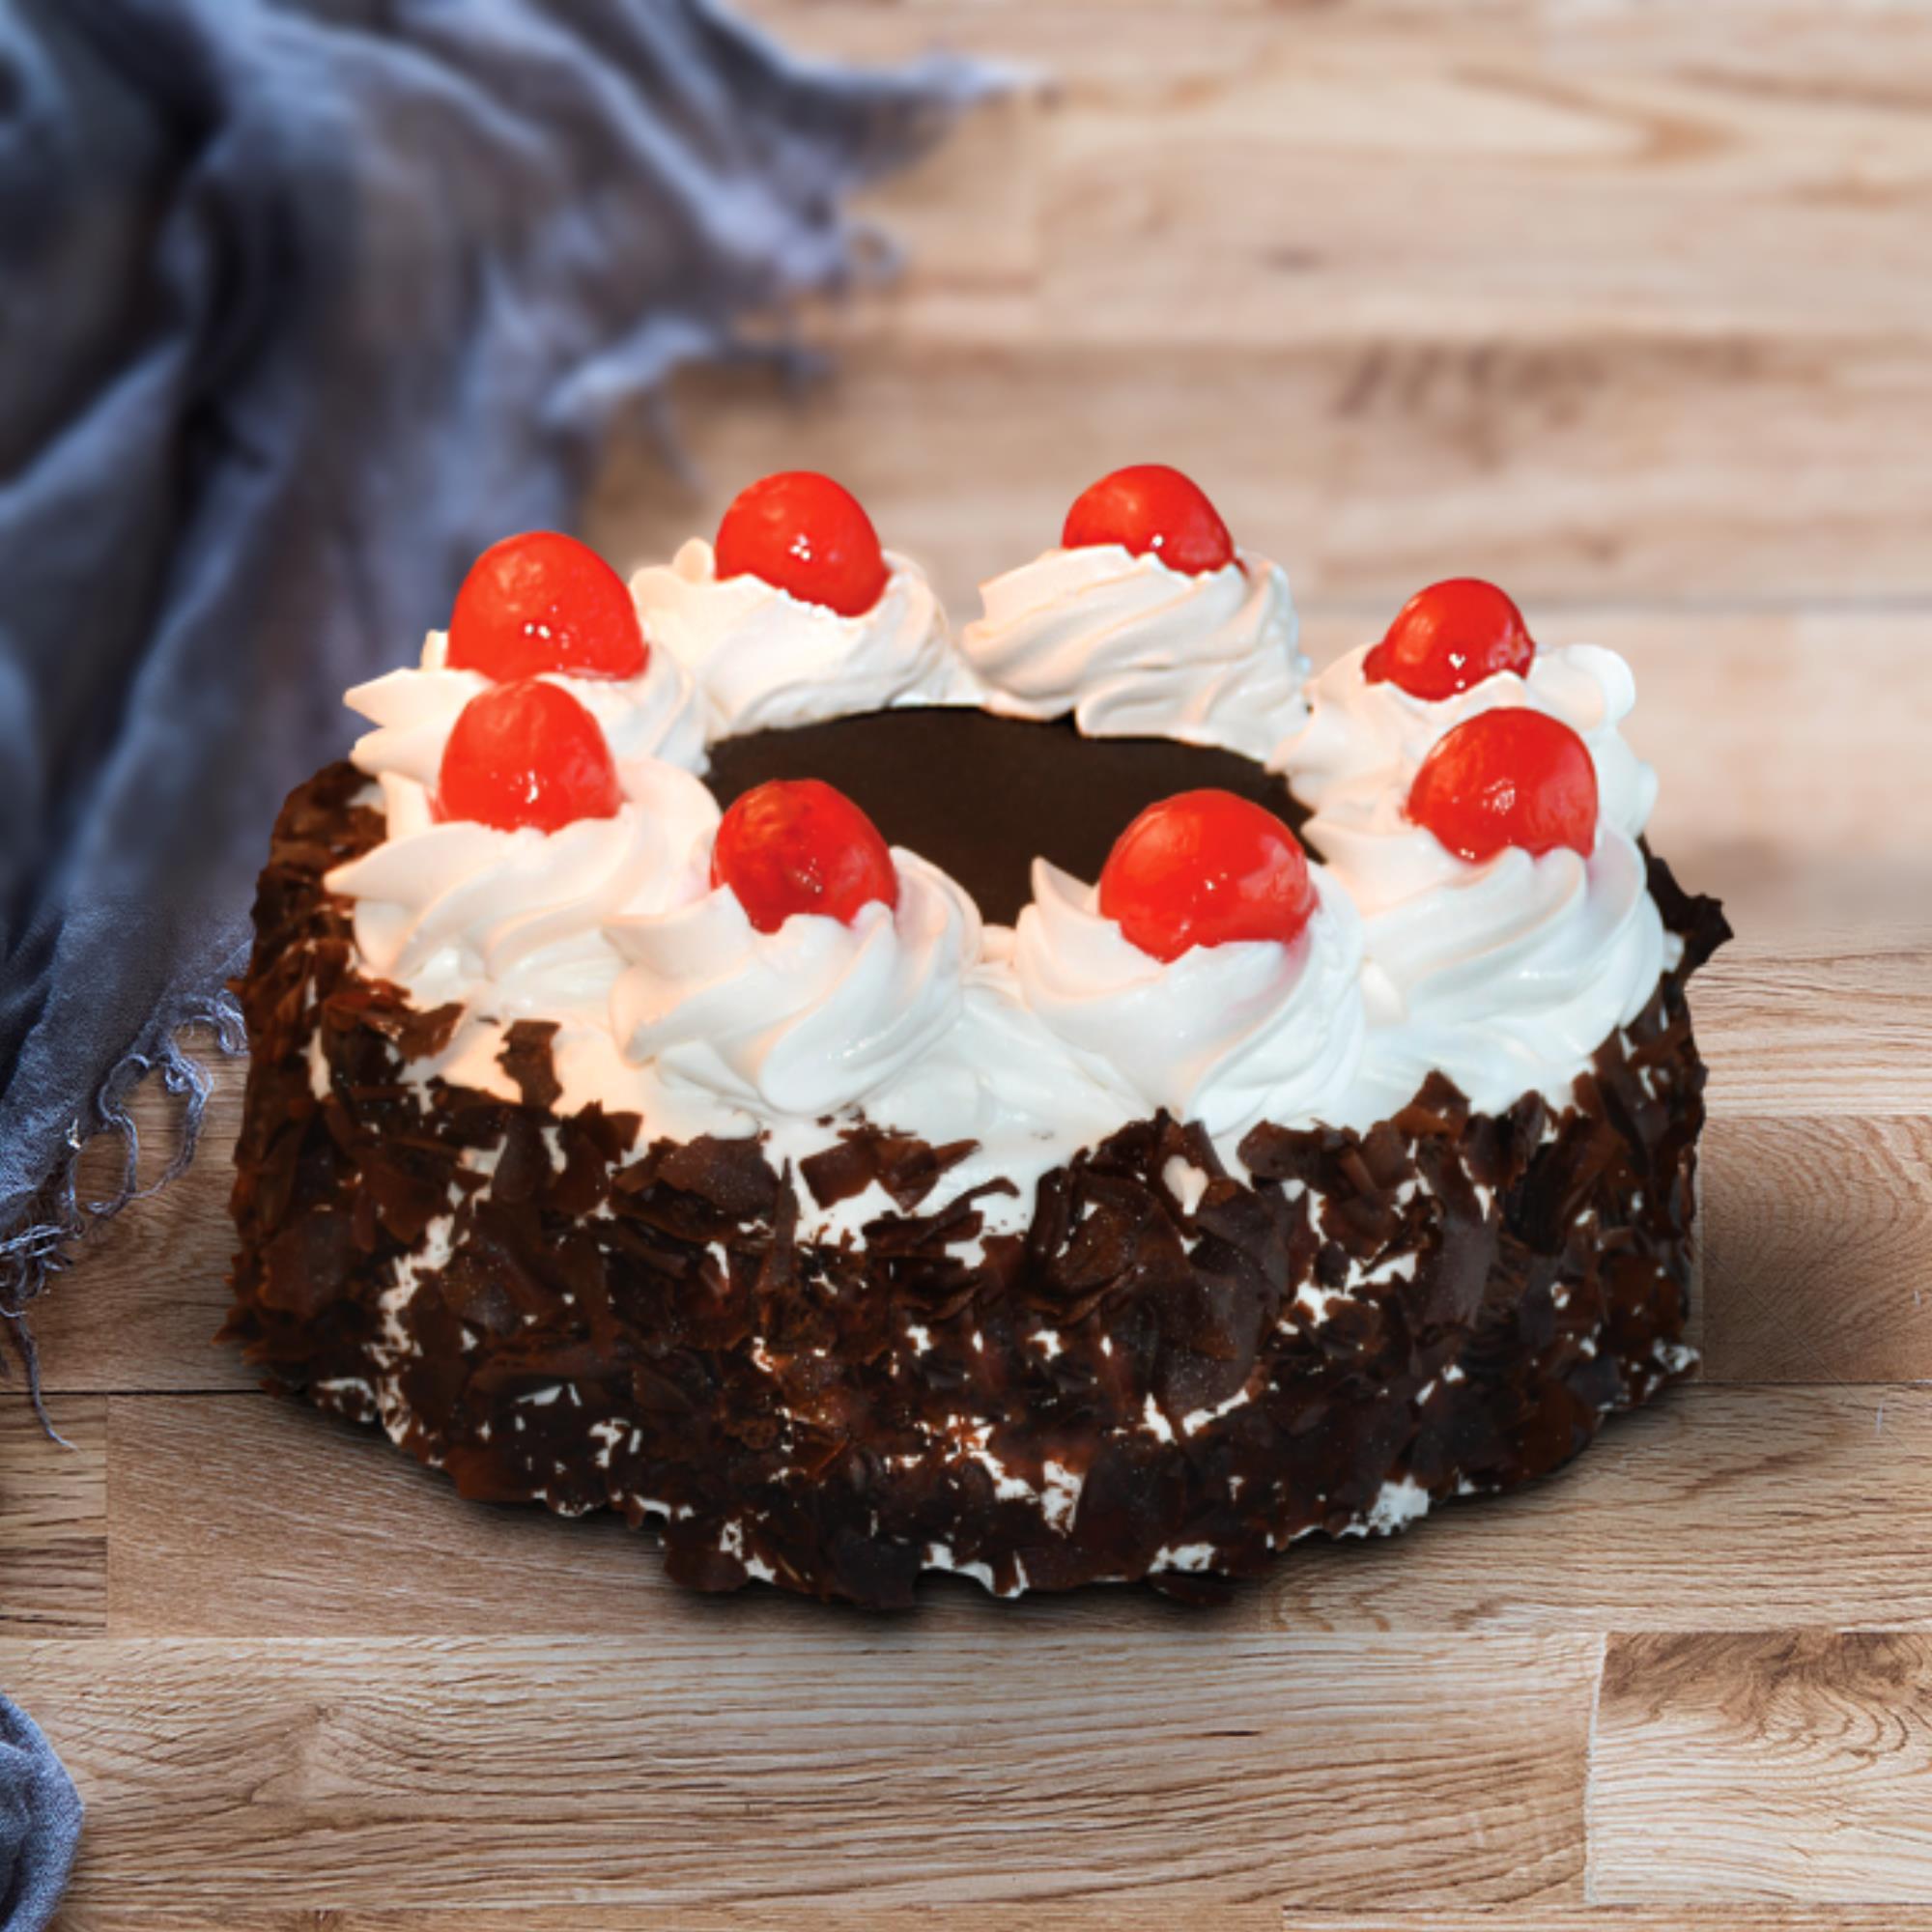 The best black forest cakes in Singapore